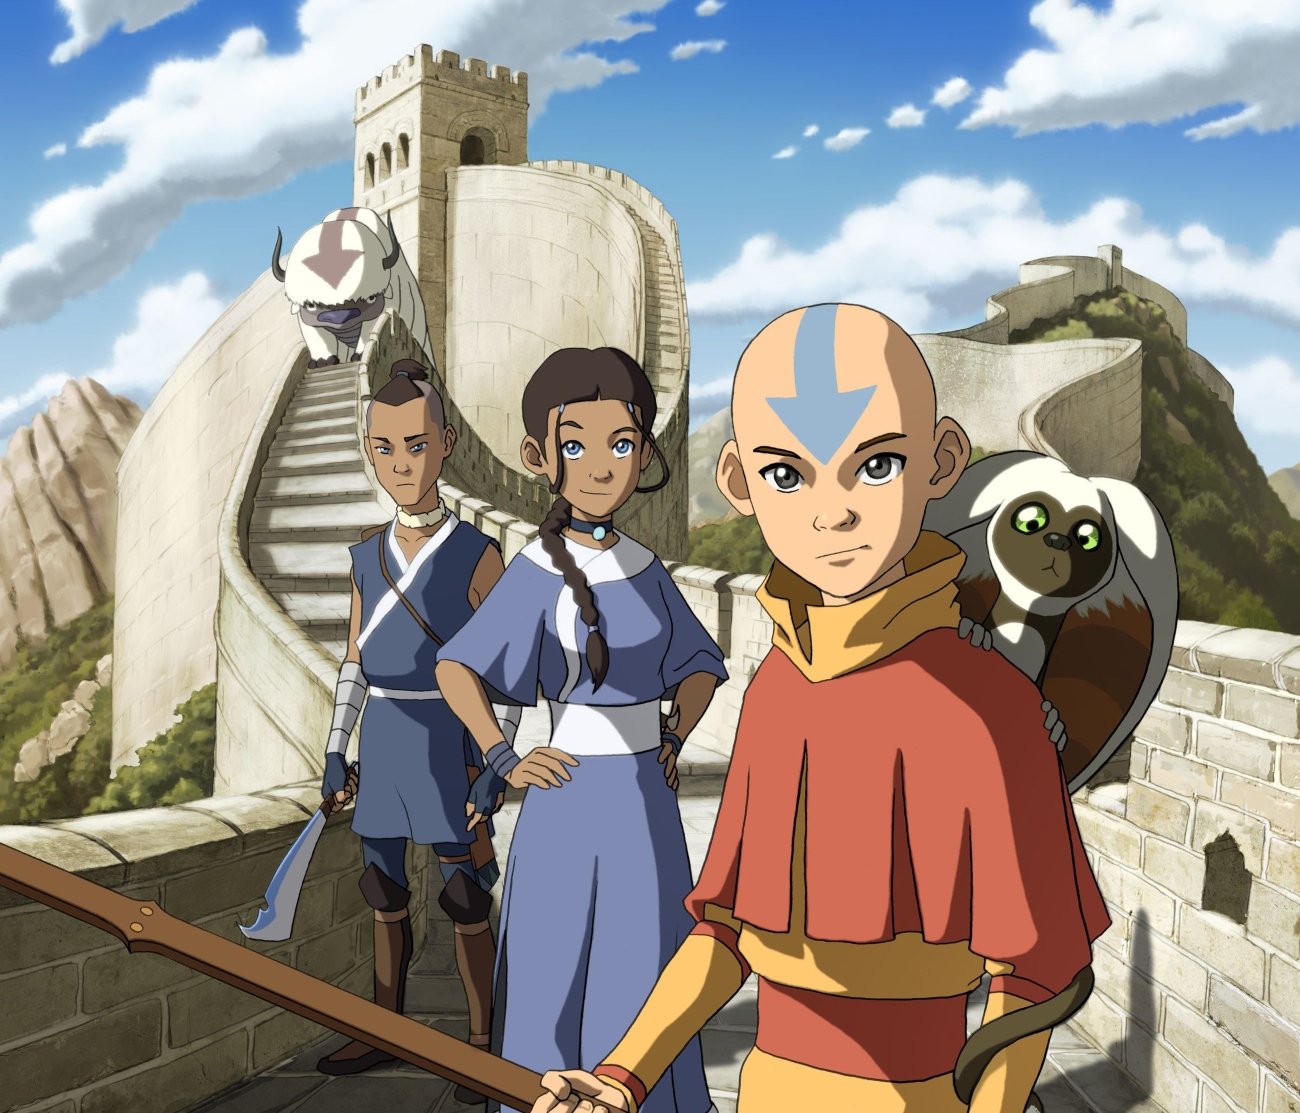 ‘Avatar: The Last Airbender’: Original Finale Plan Would Have Been a Disastrous Ending